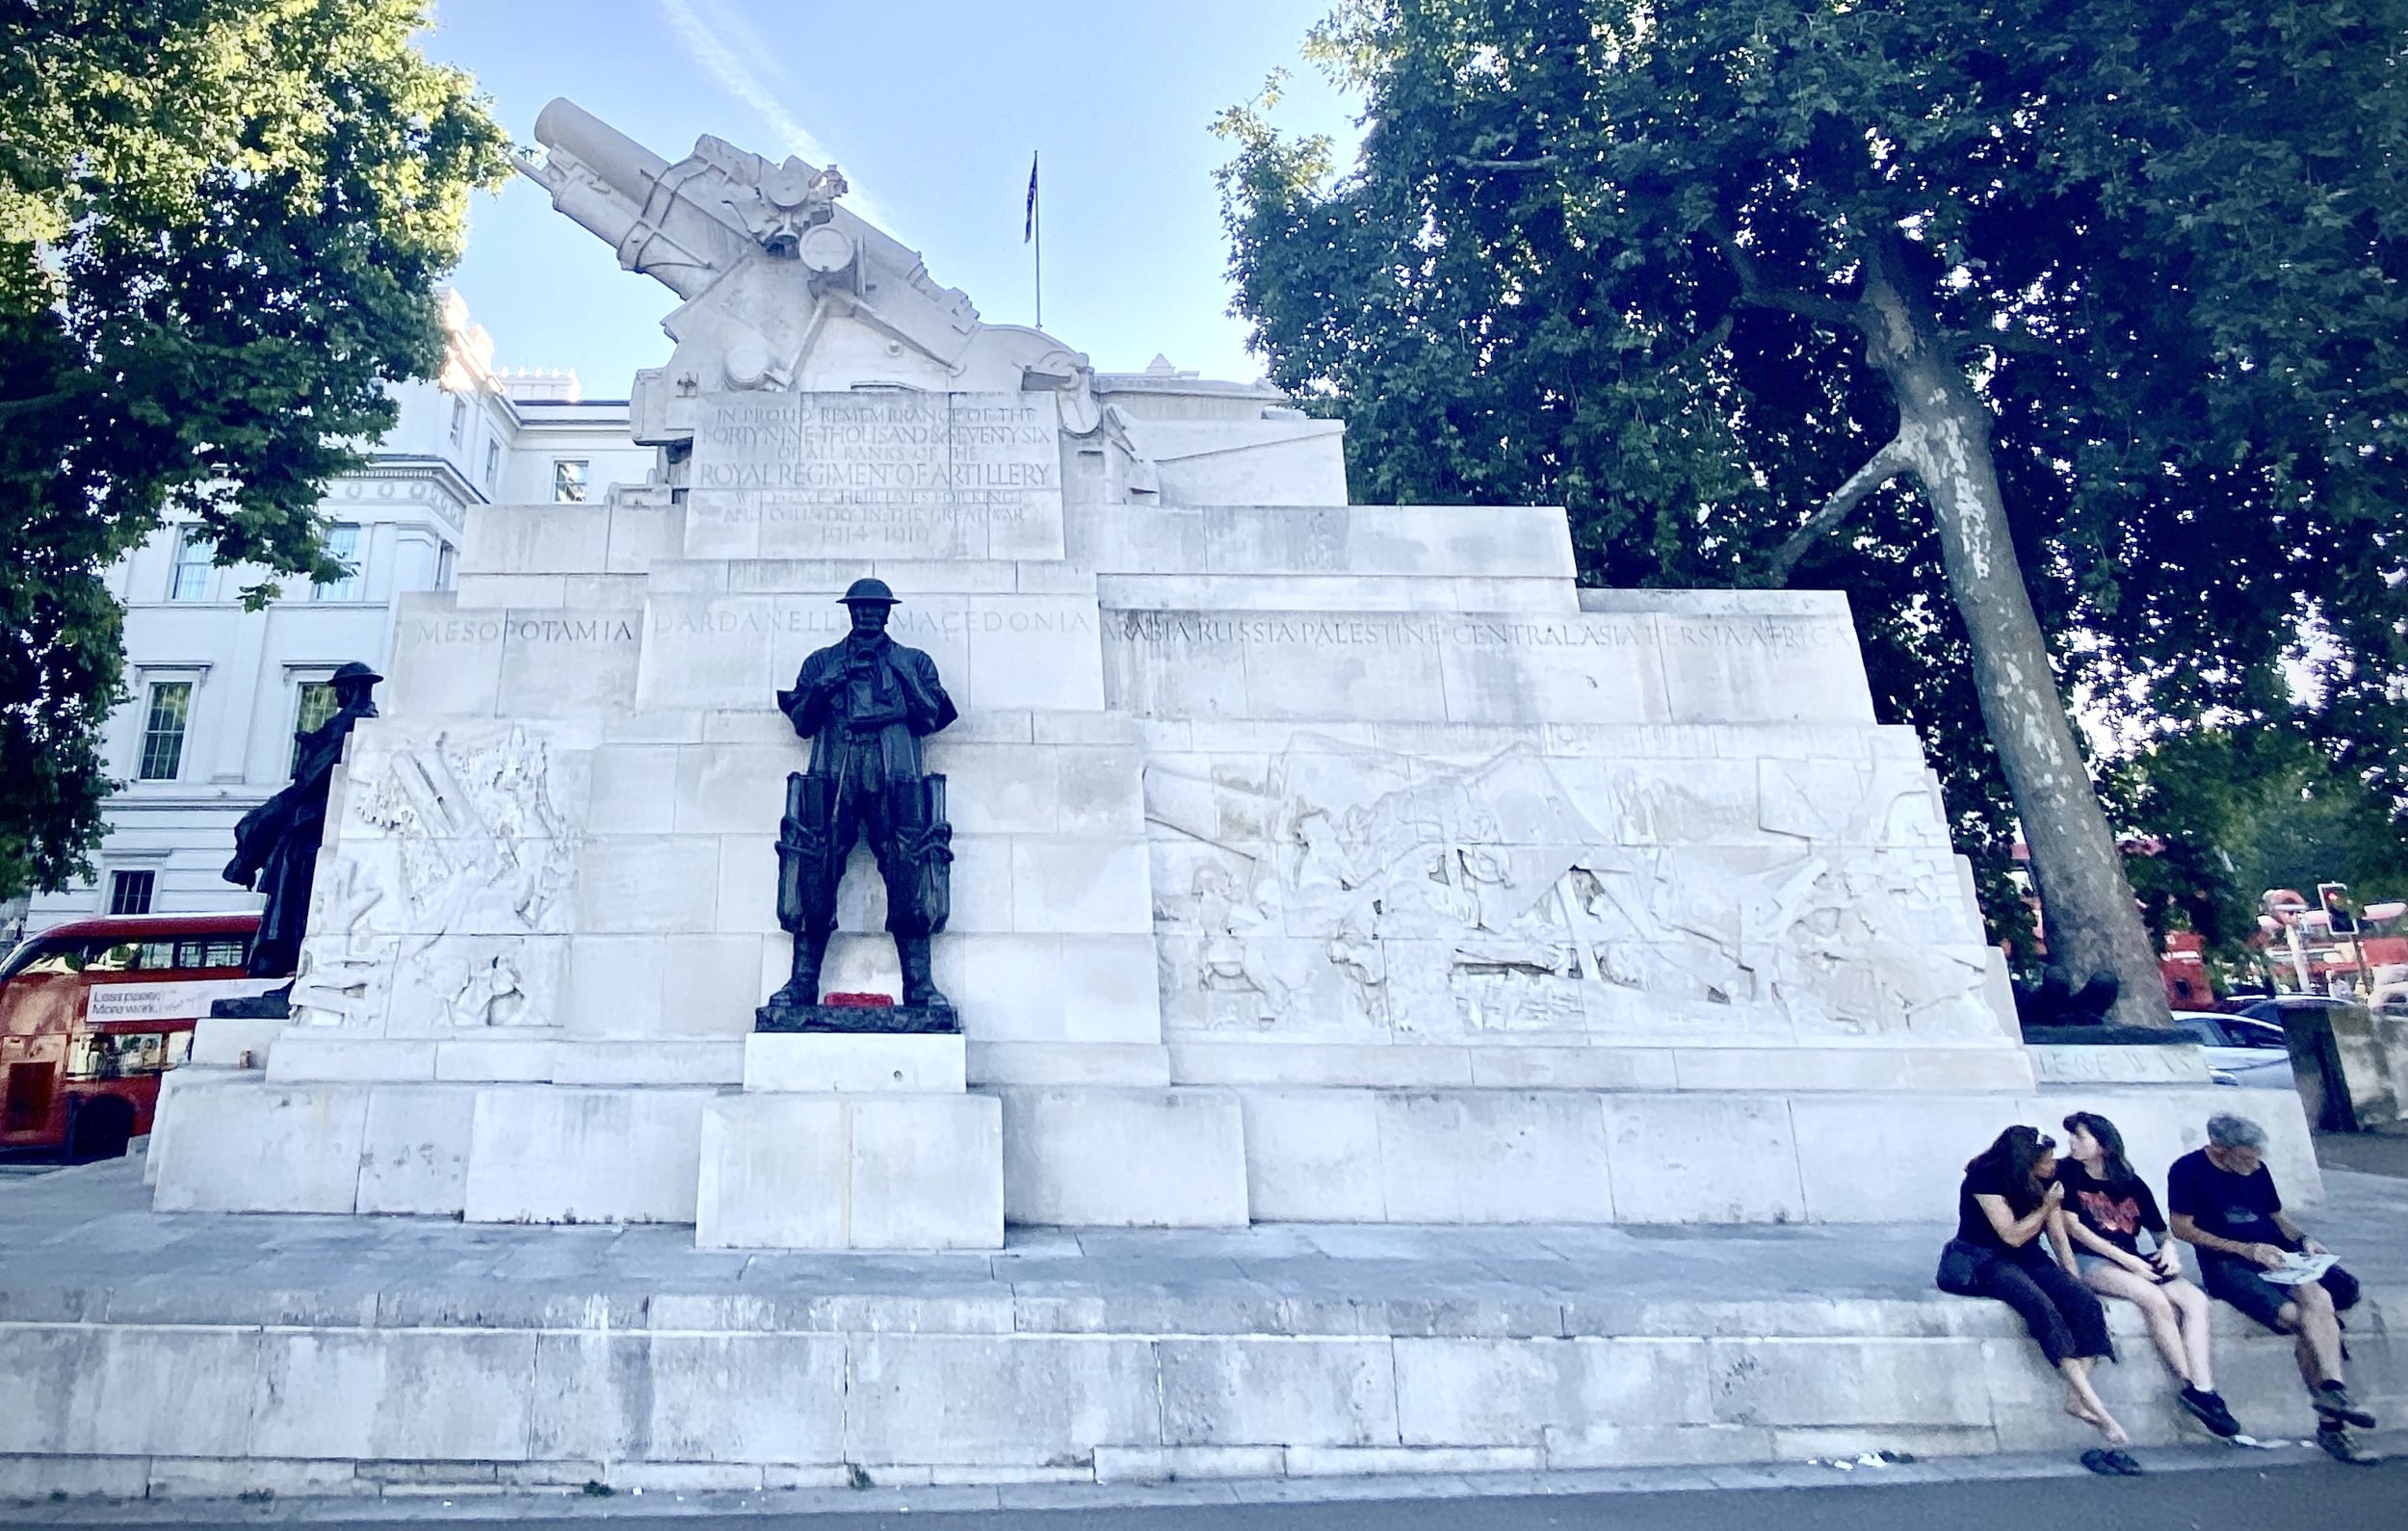  The Royal Artillery Memorial near Buckingham Palace.  My father spent some time in London during World War II before being shipped off to France in 1944. 